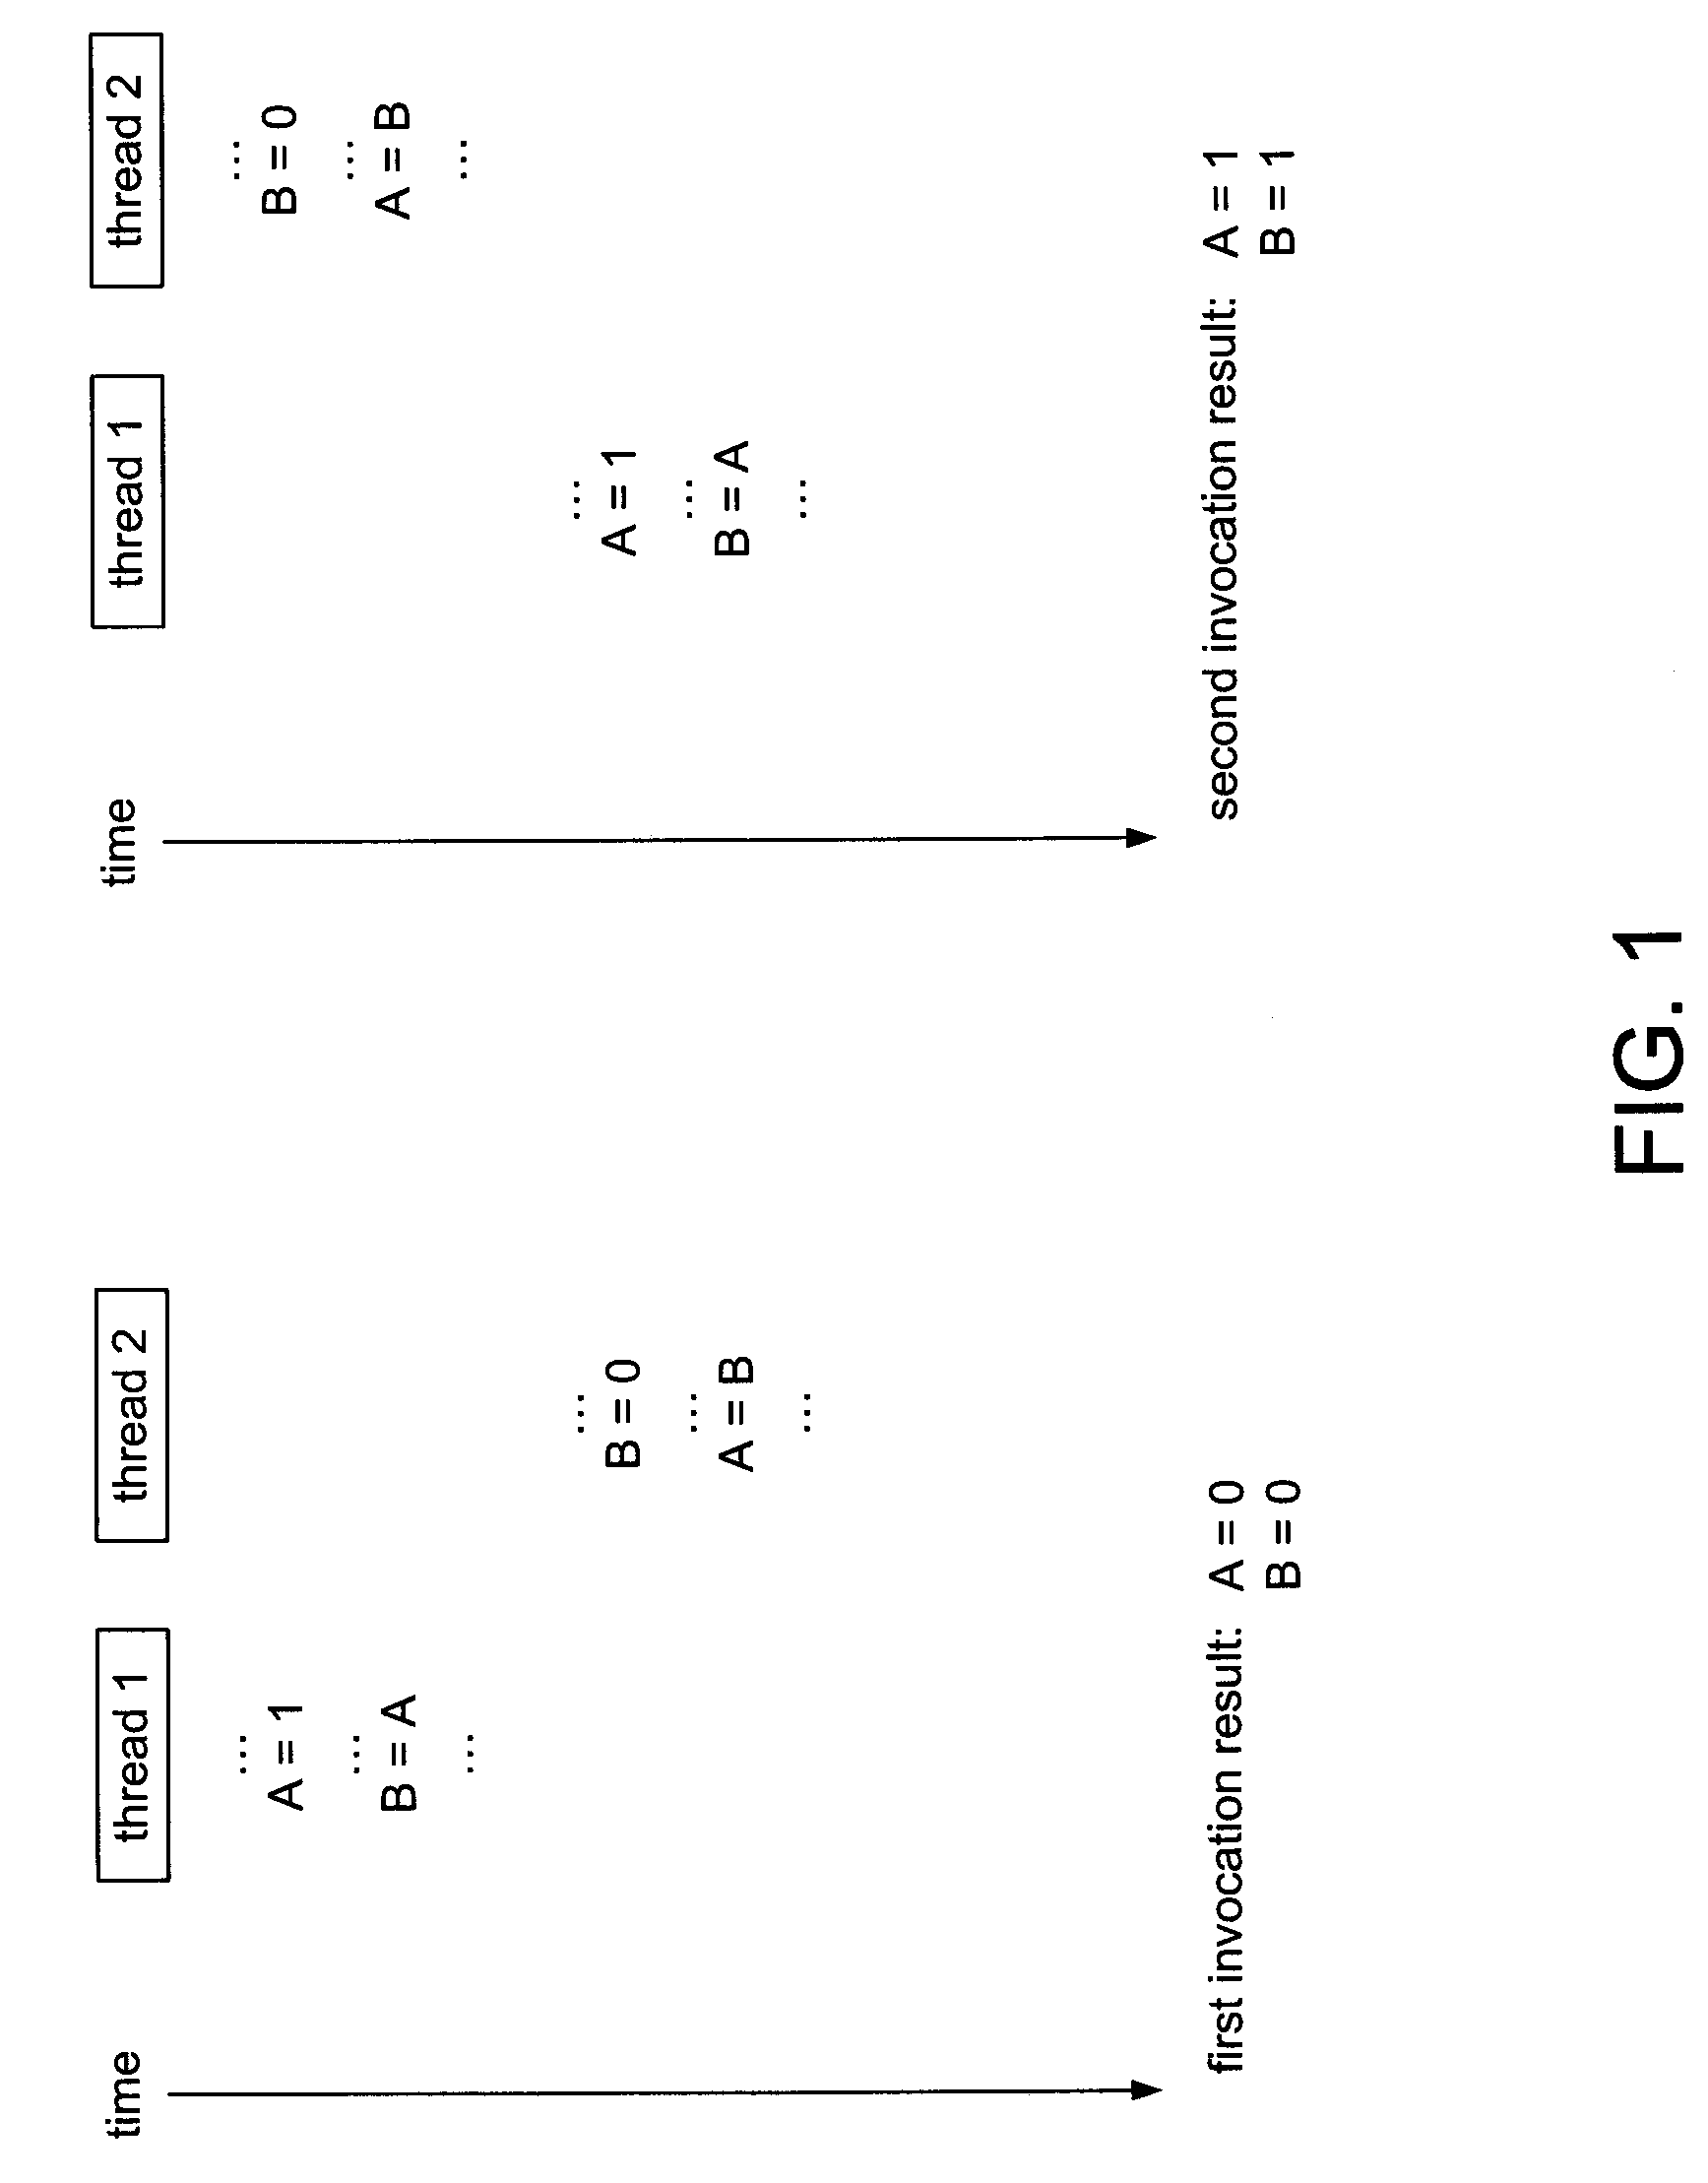 Critical path deterministic execution of multithreaded applications in a transactional memory system